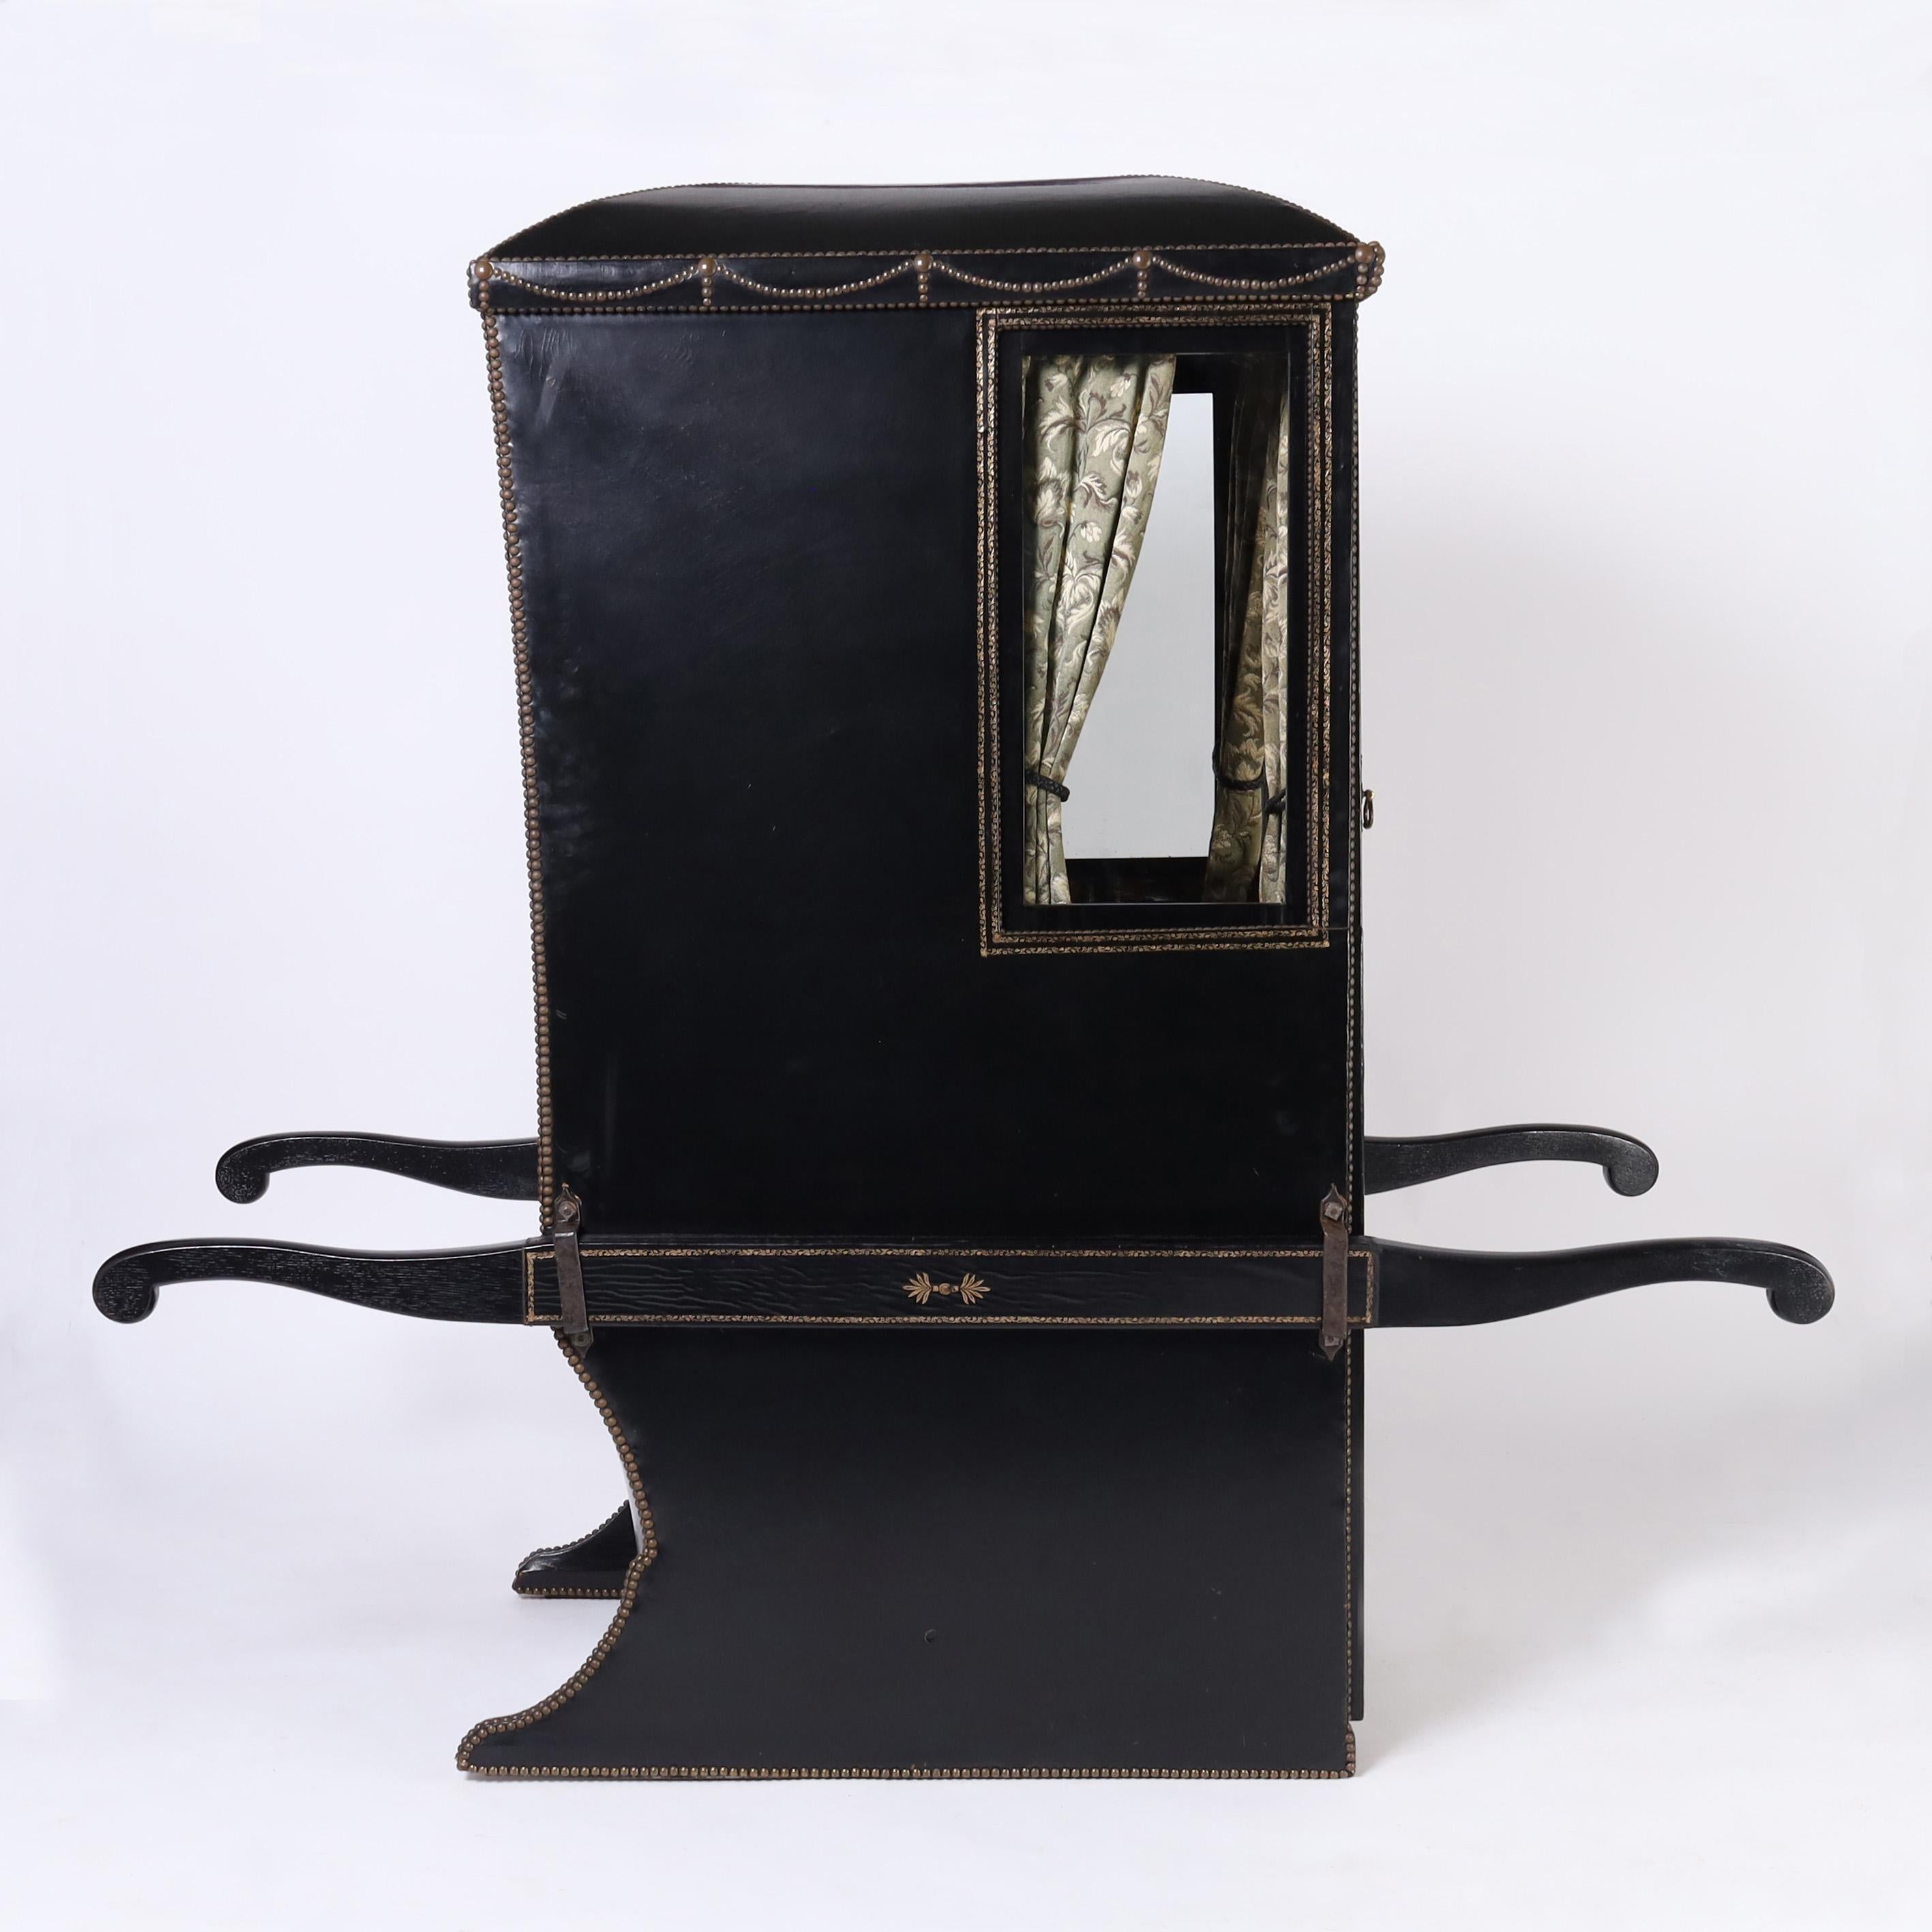 Arrive in style in this rare and remarkable 19th century luxurious English sedan chair entirely clad in tooled black leather decorated with brass tacks and featuring a brown leather interior with a button tufted seat over a secret compartment and